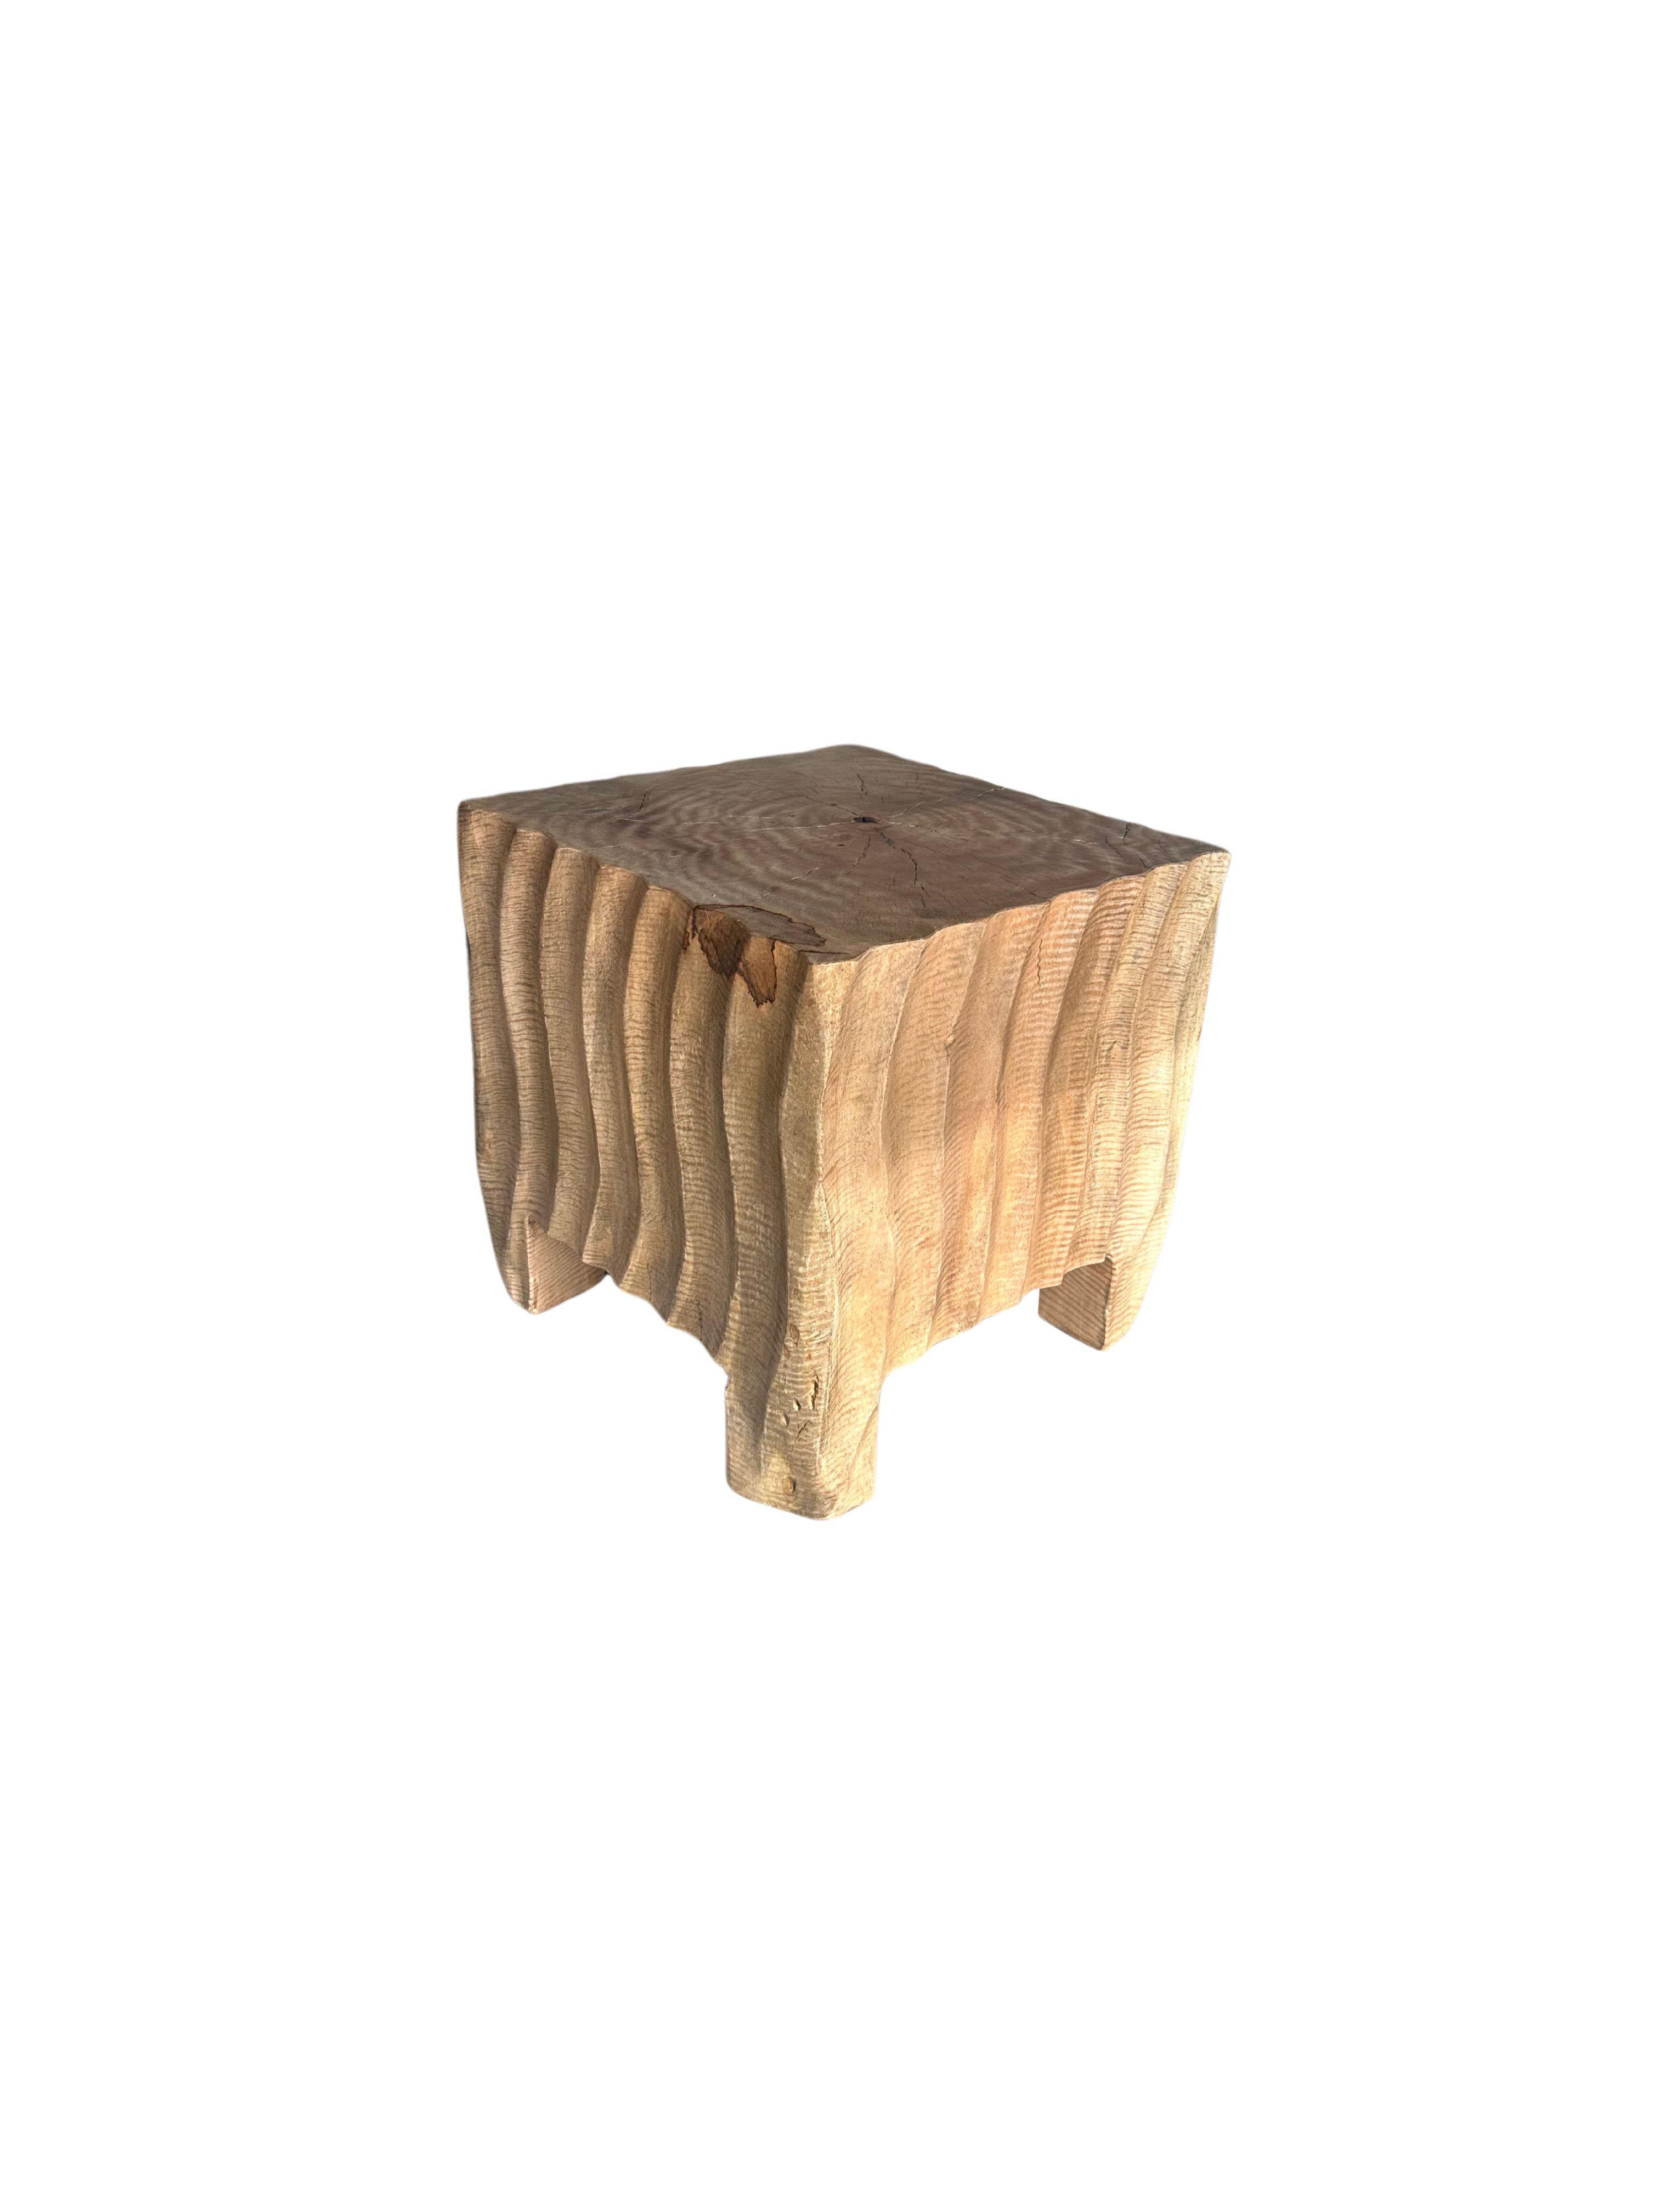 Indonesian Sculptural Side Table Mango Wood Natural Finish For Sale